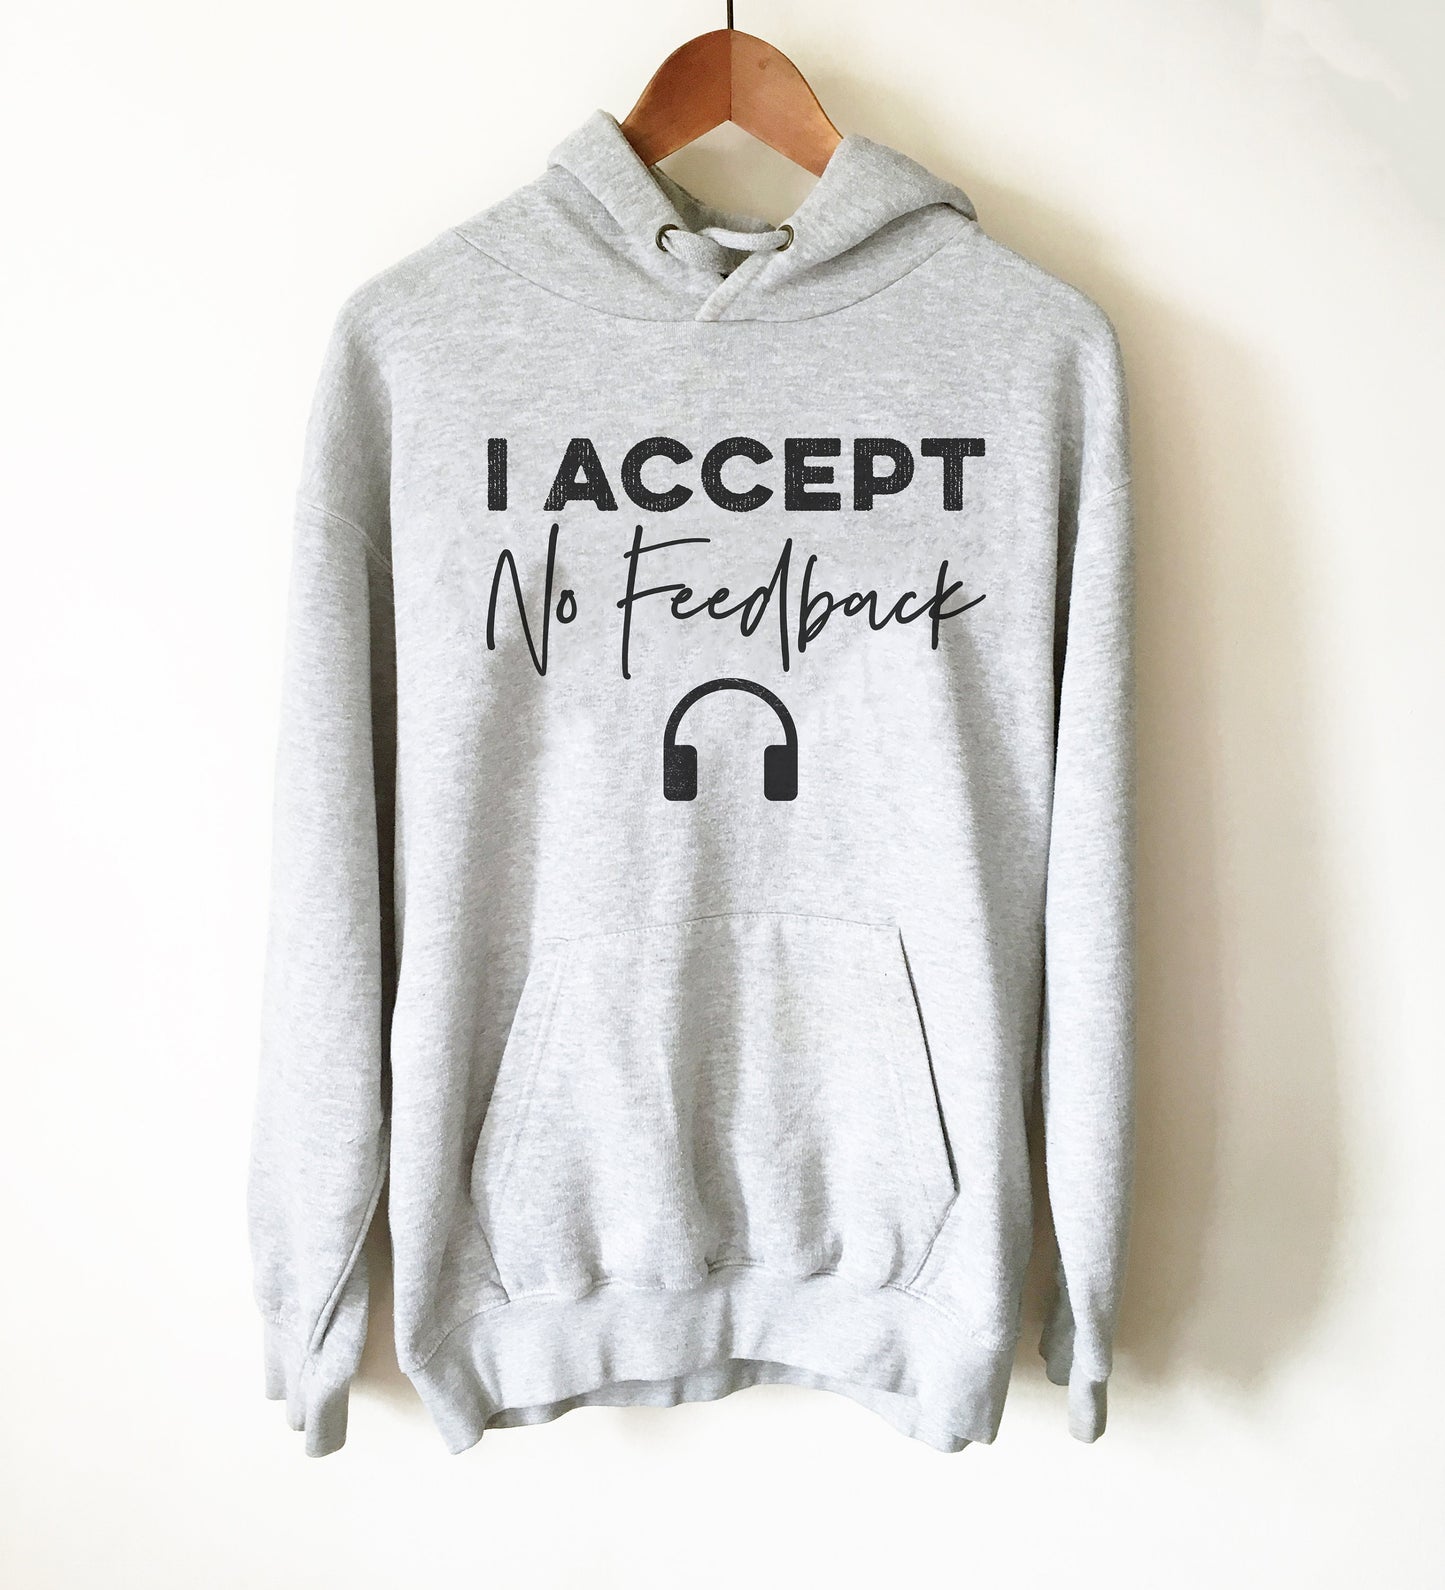 I Accept No Feedback Hoodie - Audio Engineer Shirt, Assistant Engineer, Sound Guy, Sound Girl, Sound Engineer, Record Producer, Musician